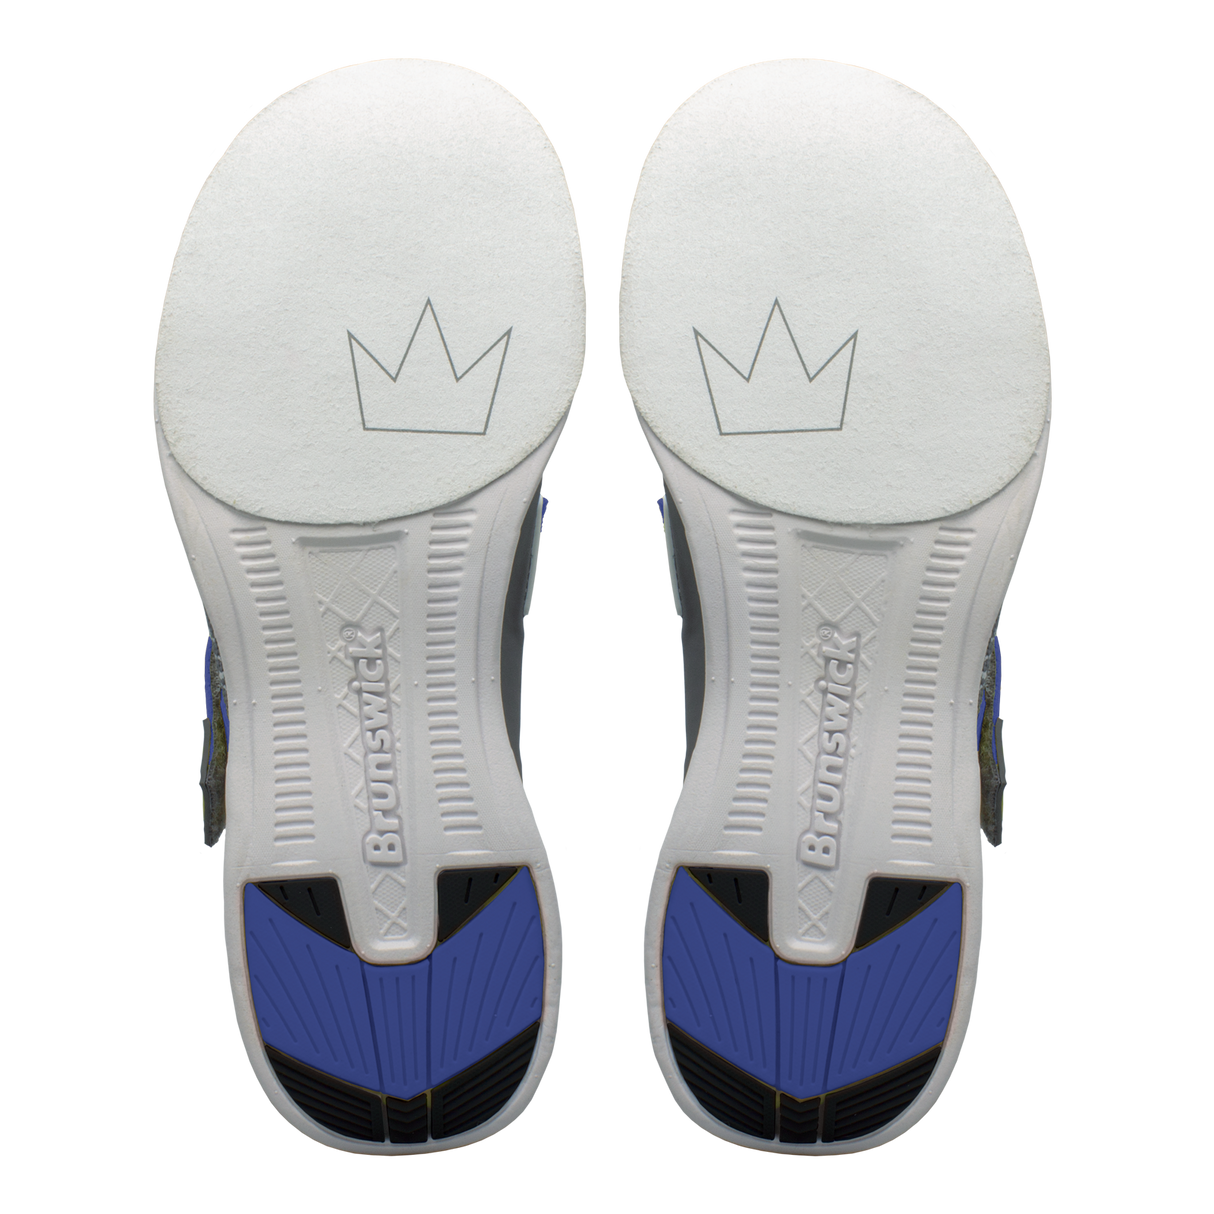 Brunswick Slingshot Royal/White Bowling Shoes * Athletic performance knit * Easy to slip on * No lace fastening system * Extra-light molded EVA outsole * Raised rubber heel for a controlled slide * Pure slide microfiber slide soles on both sides * Superior slide immediately *  * 